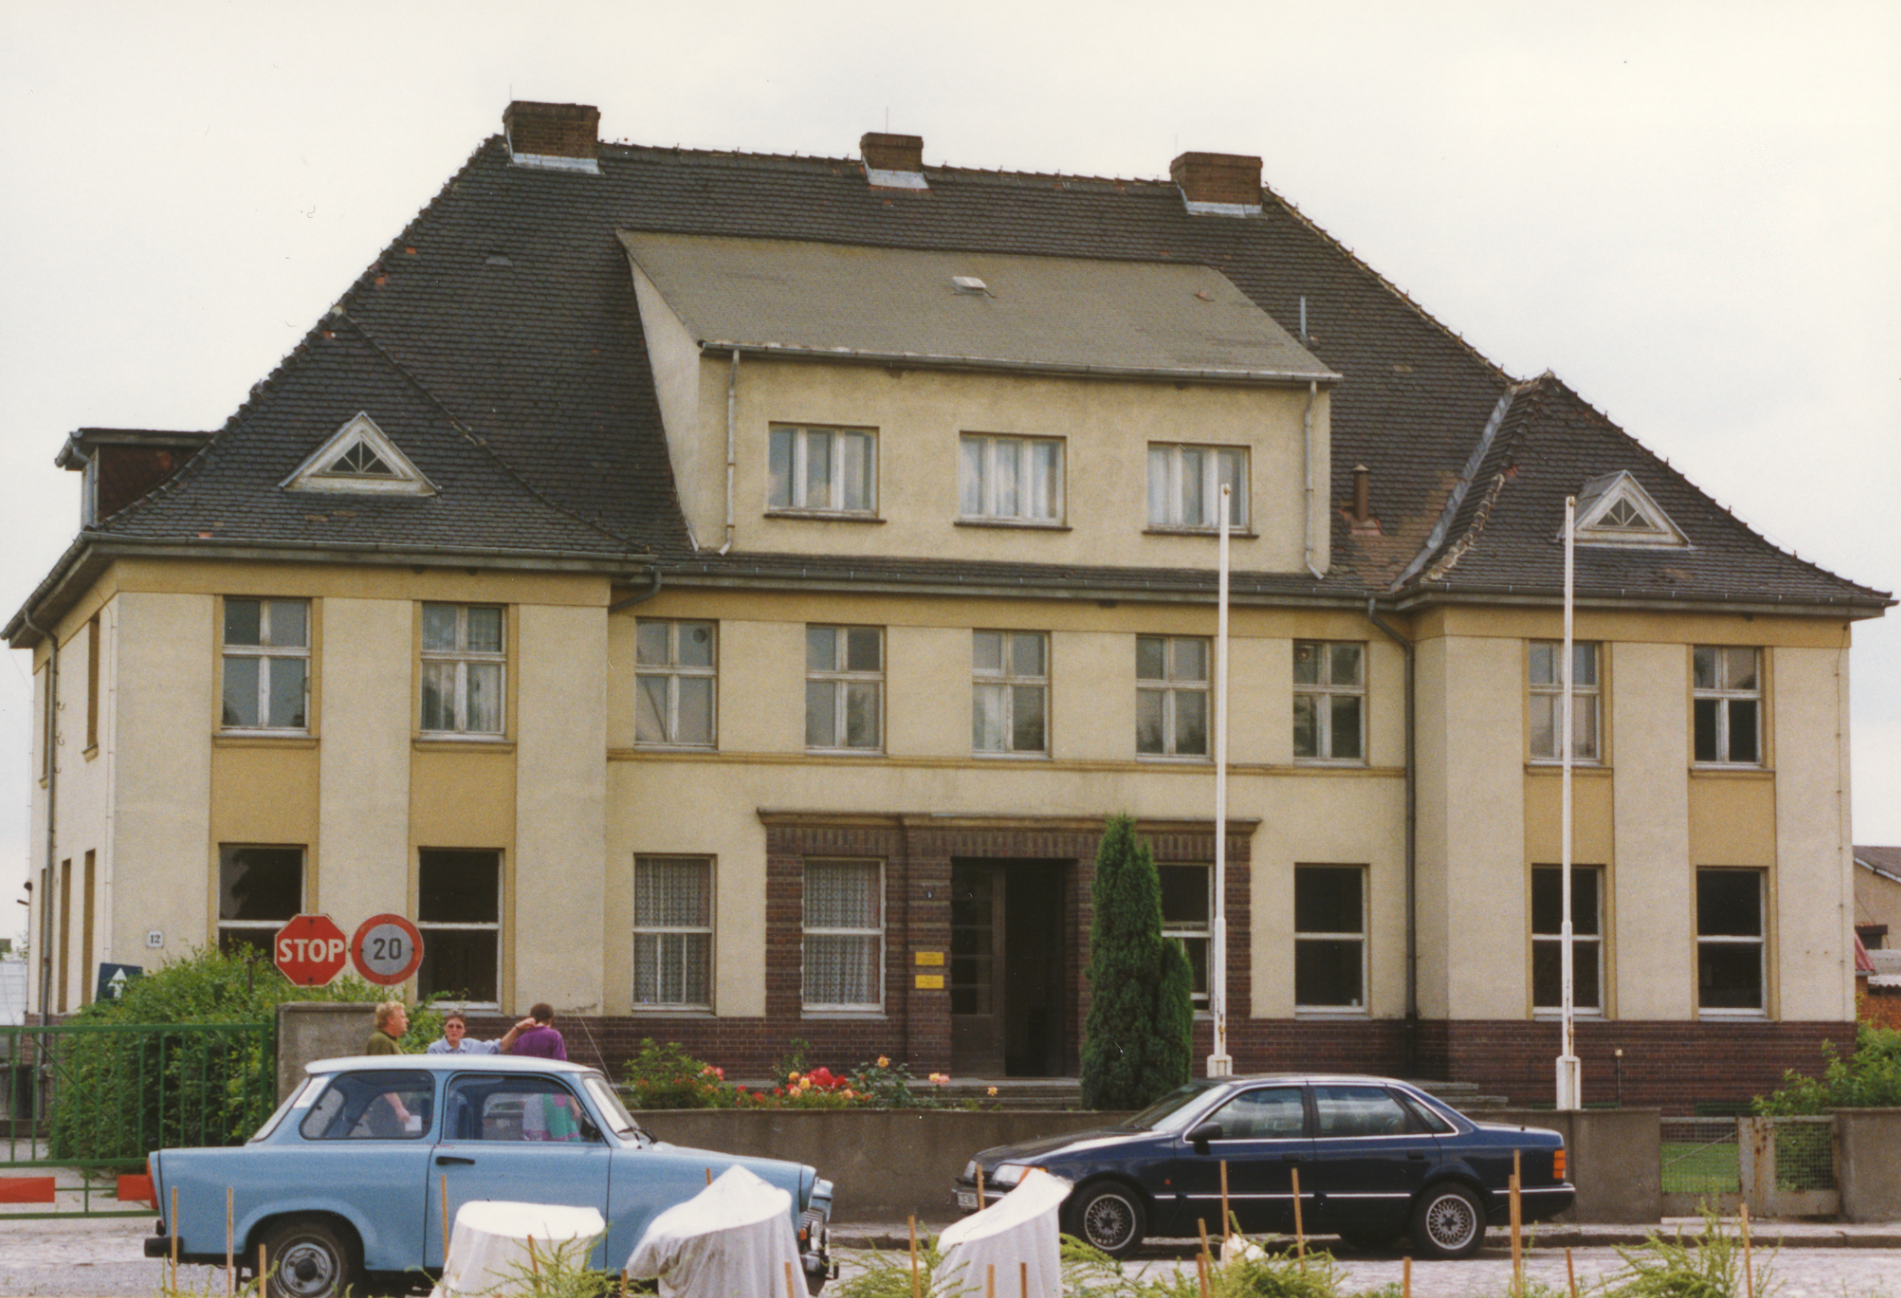 Institute for plant breeding in Klein Wanzleben, established in 1930, today the administration building of the breeding station